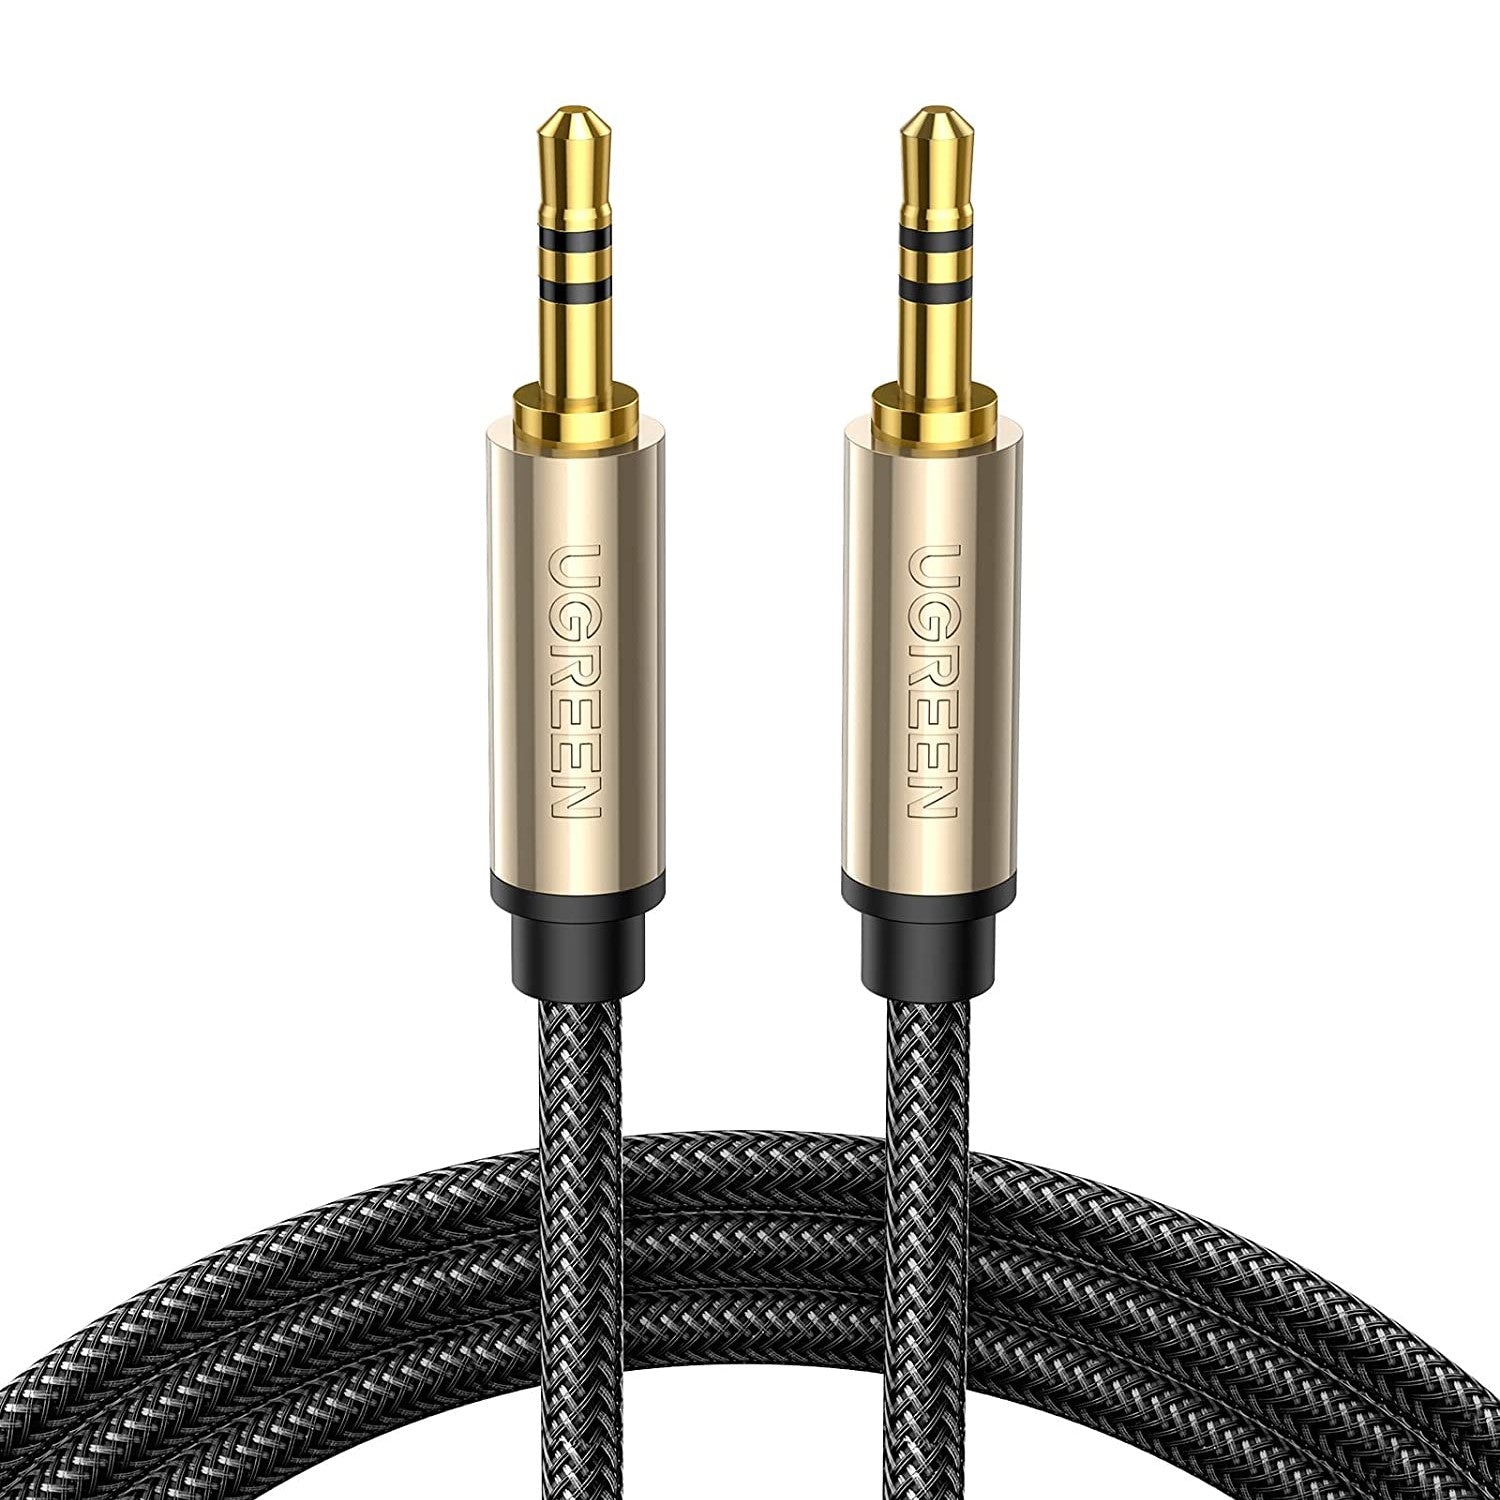 UGREEN 3.5mm Audio Cable AUX Cord Male to Male Professional HiFi Cable with Silver-Plating Copper Core, Gold Plated, Nylon Braid